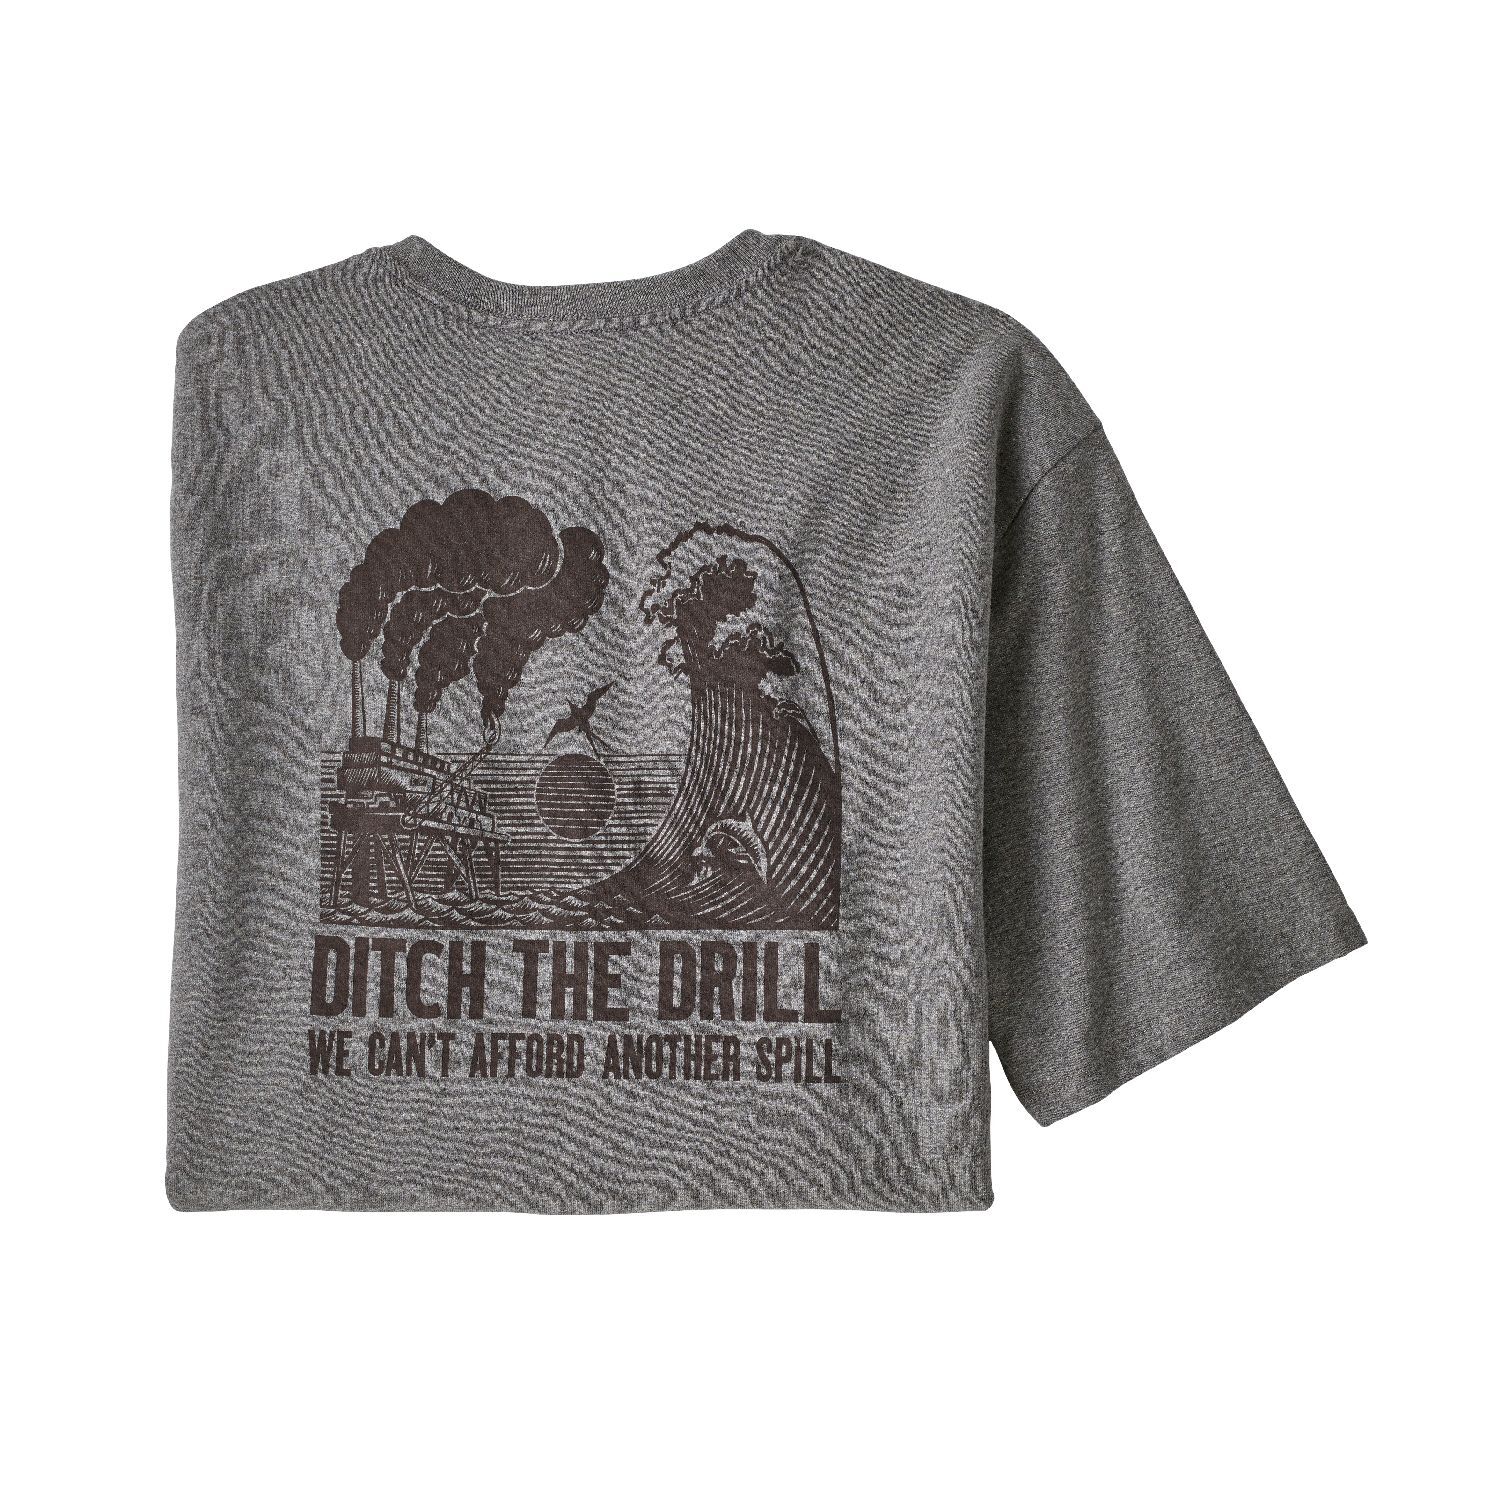 Patagonia Ditch The Drill Responsibili-Tee - T-shirt - Men's